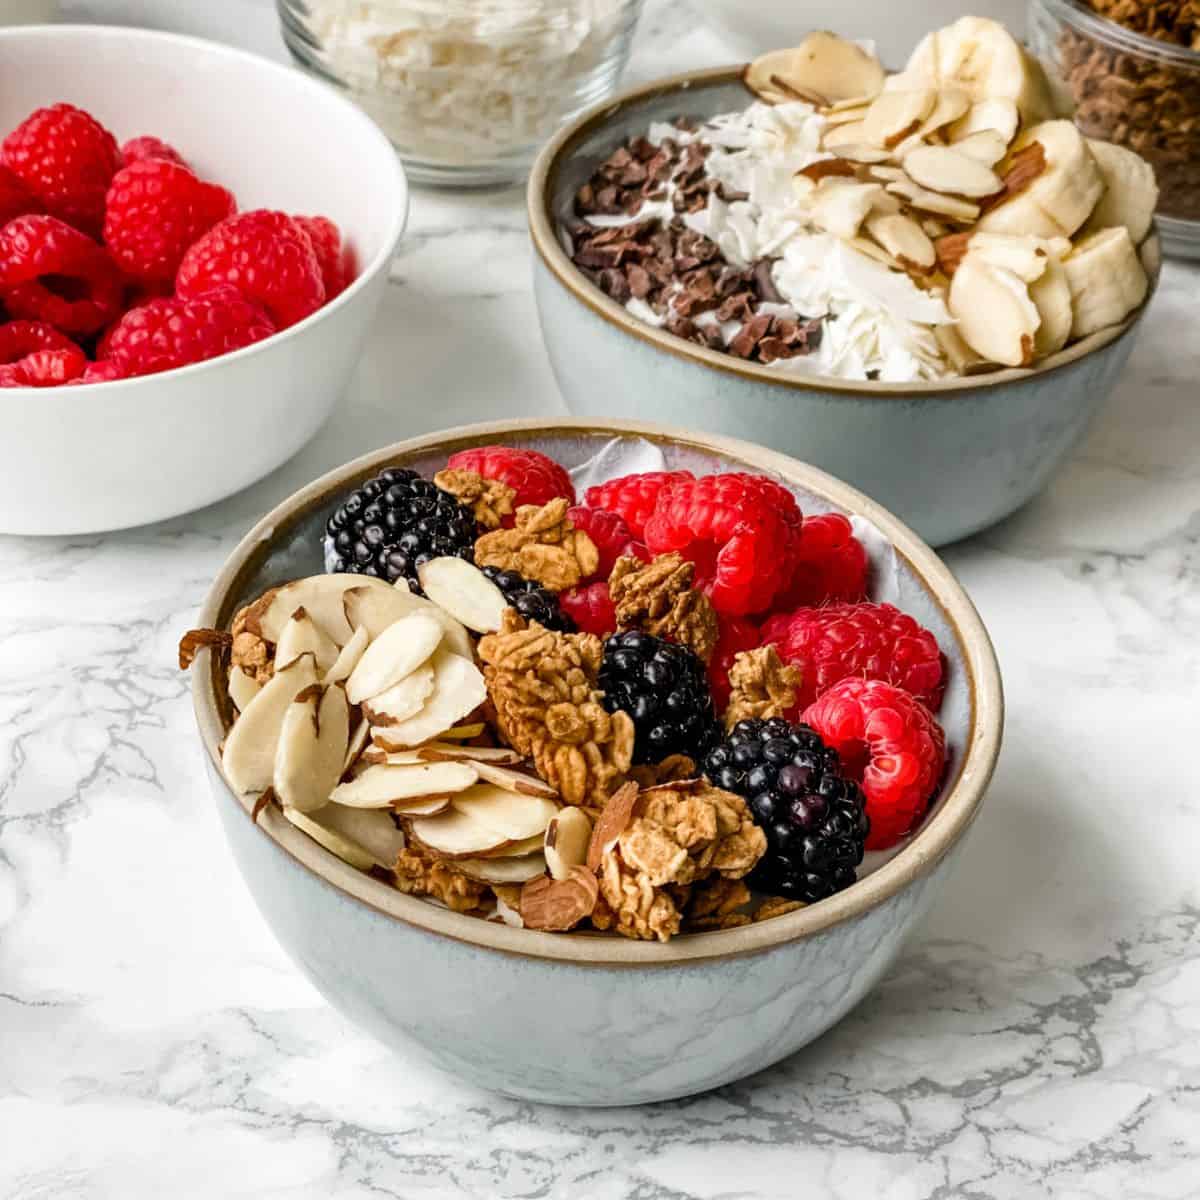 close up picture of two yogurt bowls with fruit and granola on top.